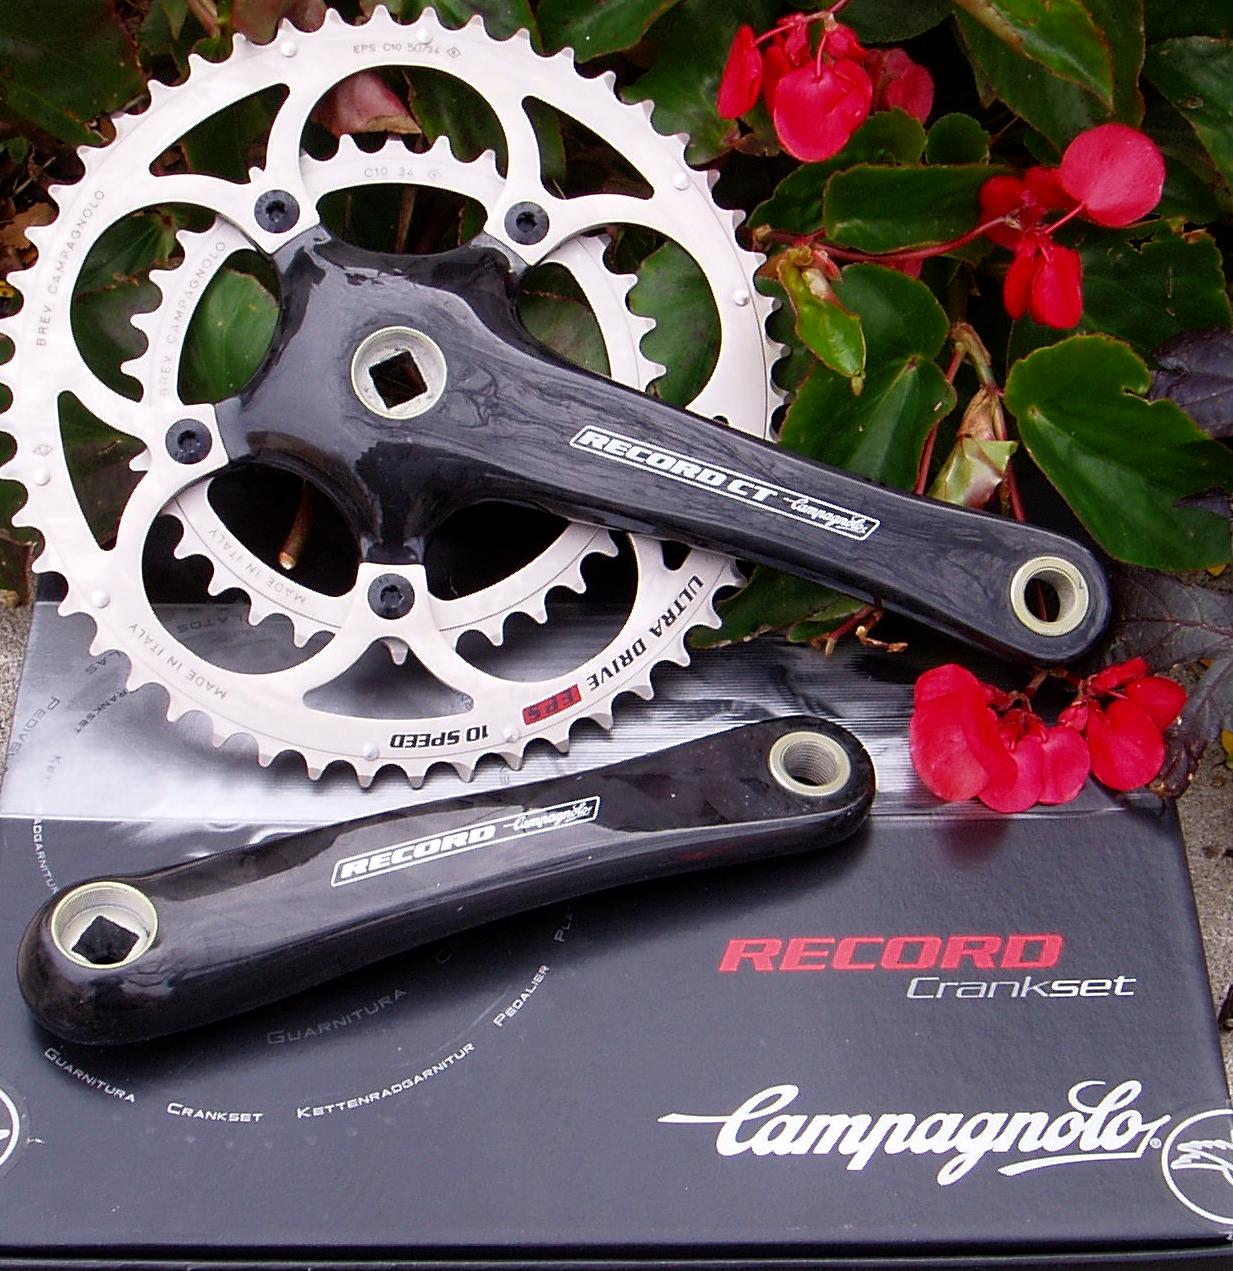 Eerder Junior Theseus More Bicycle Cranks at Yellow Jersey featuring Campagnolo Compact